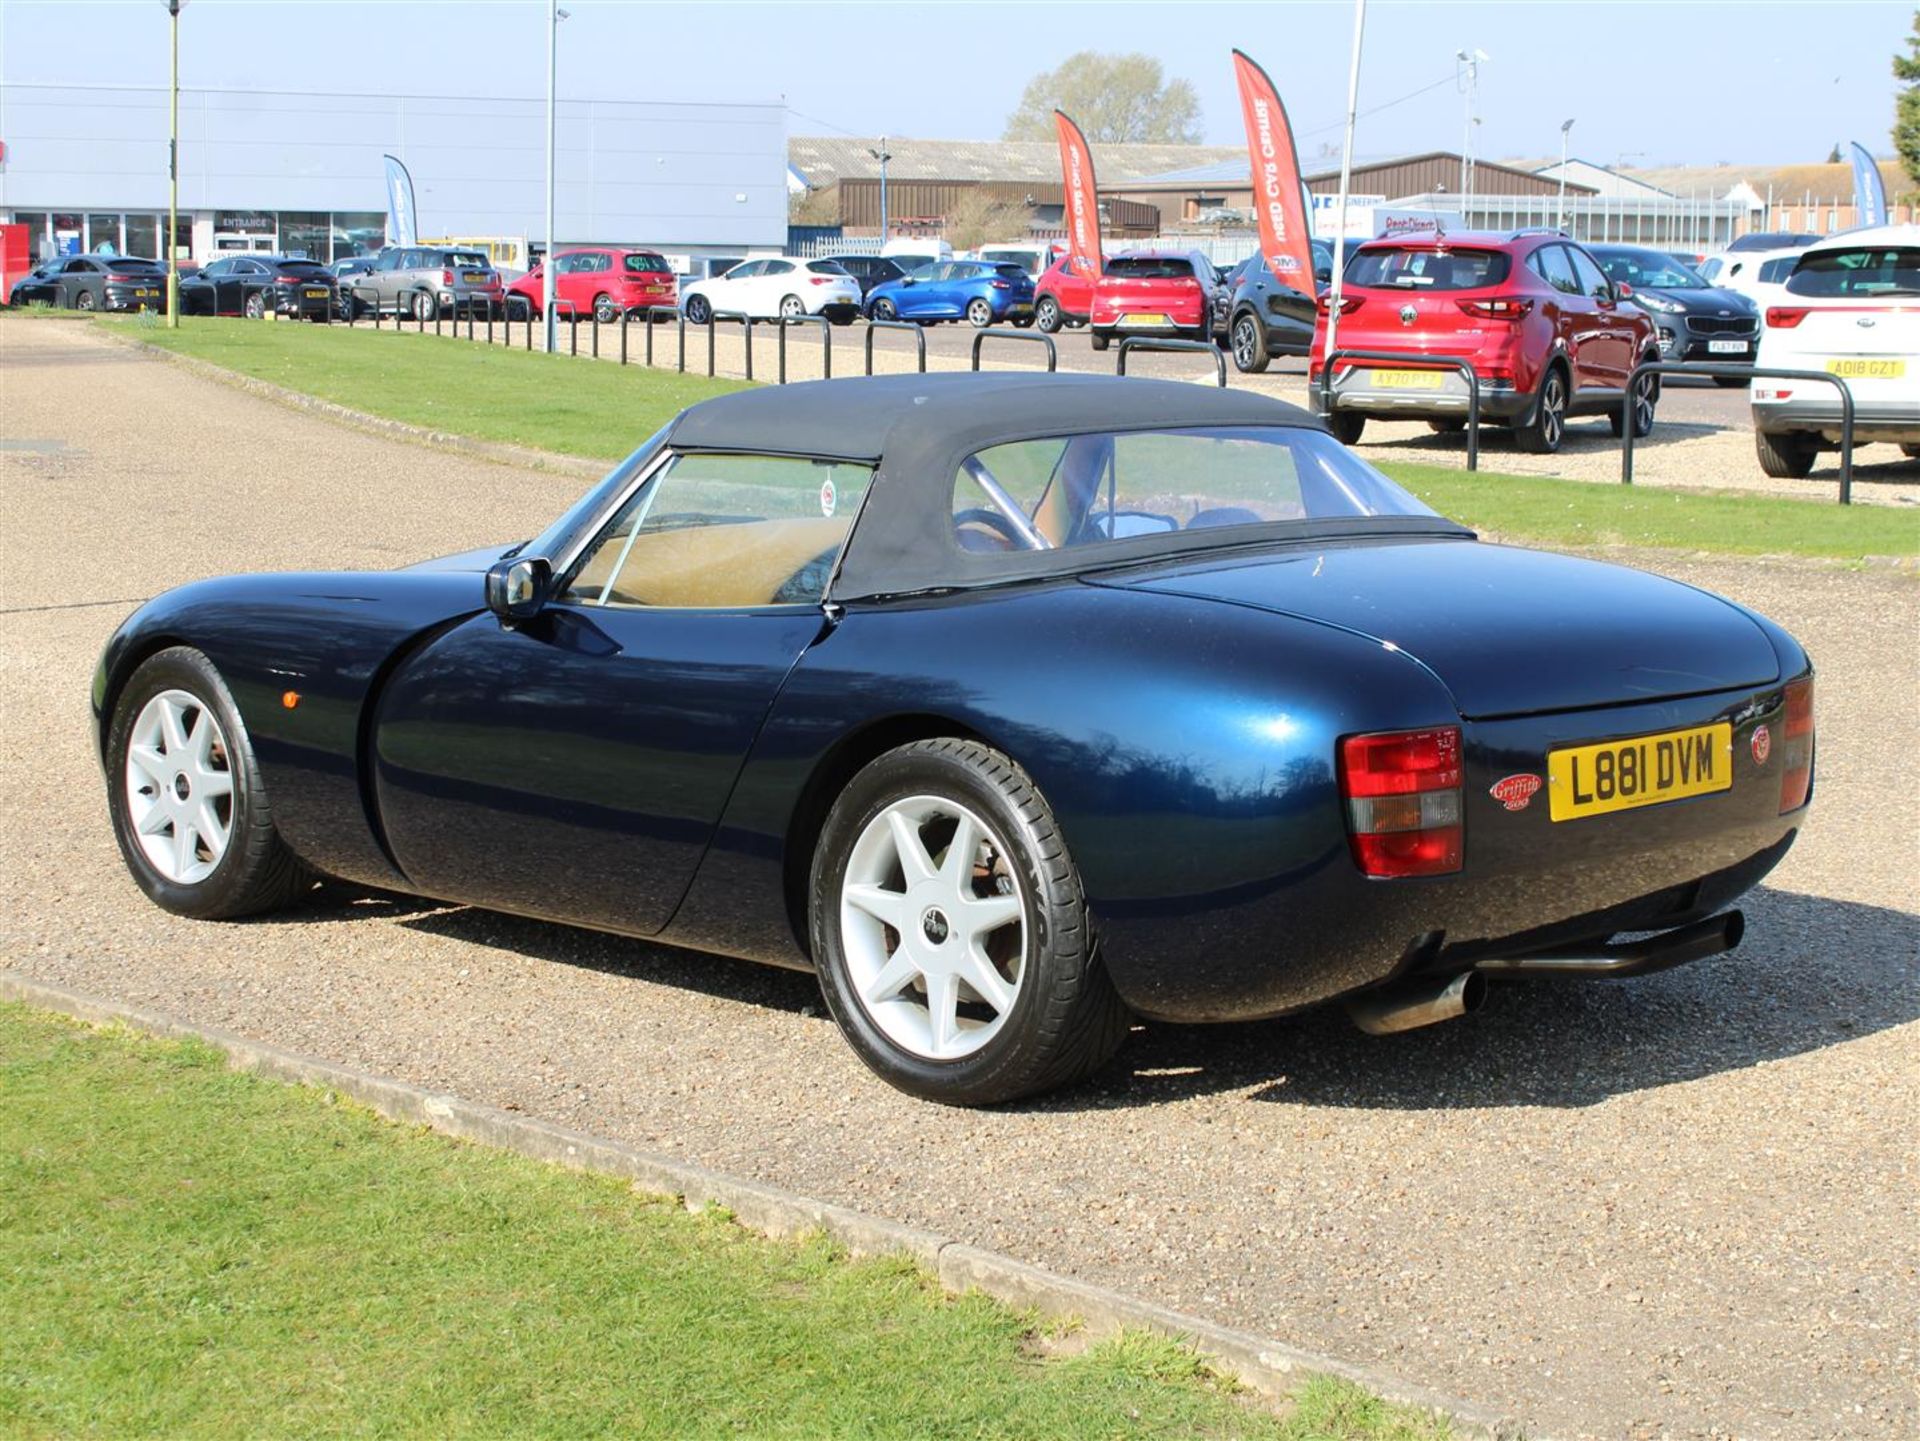 1993 TVR Griffith 500 - Image 4 of 19